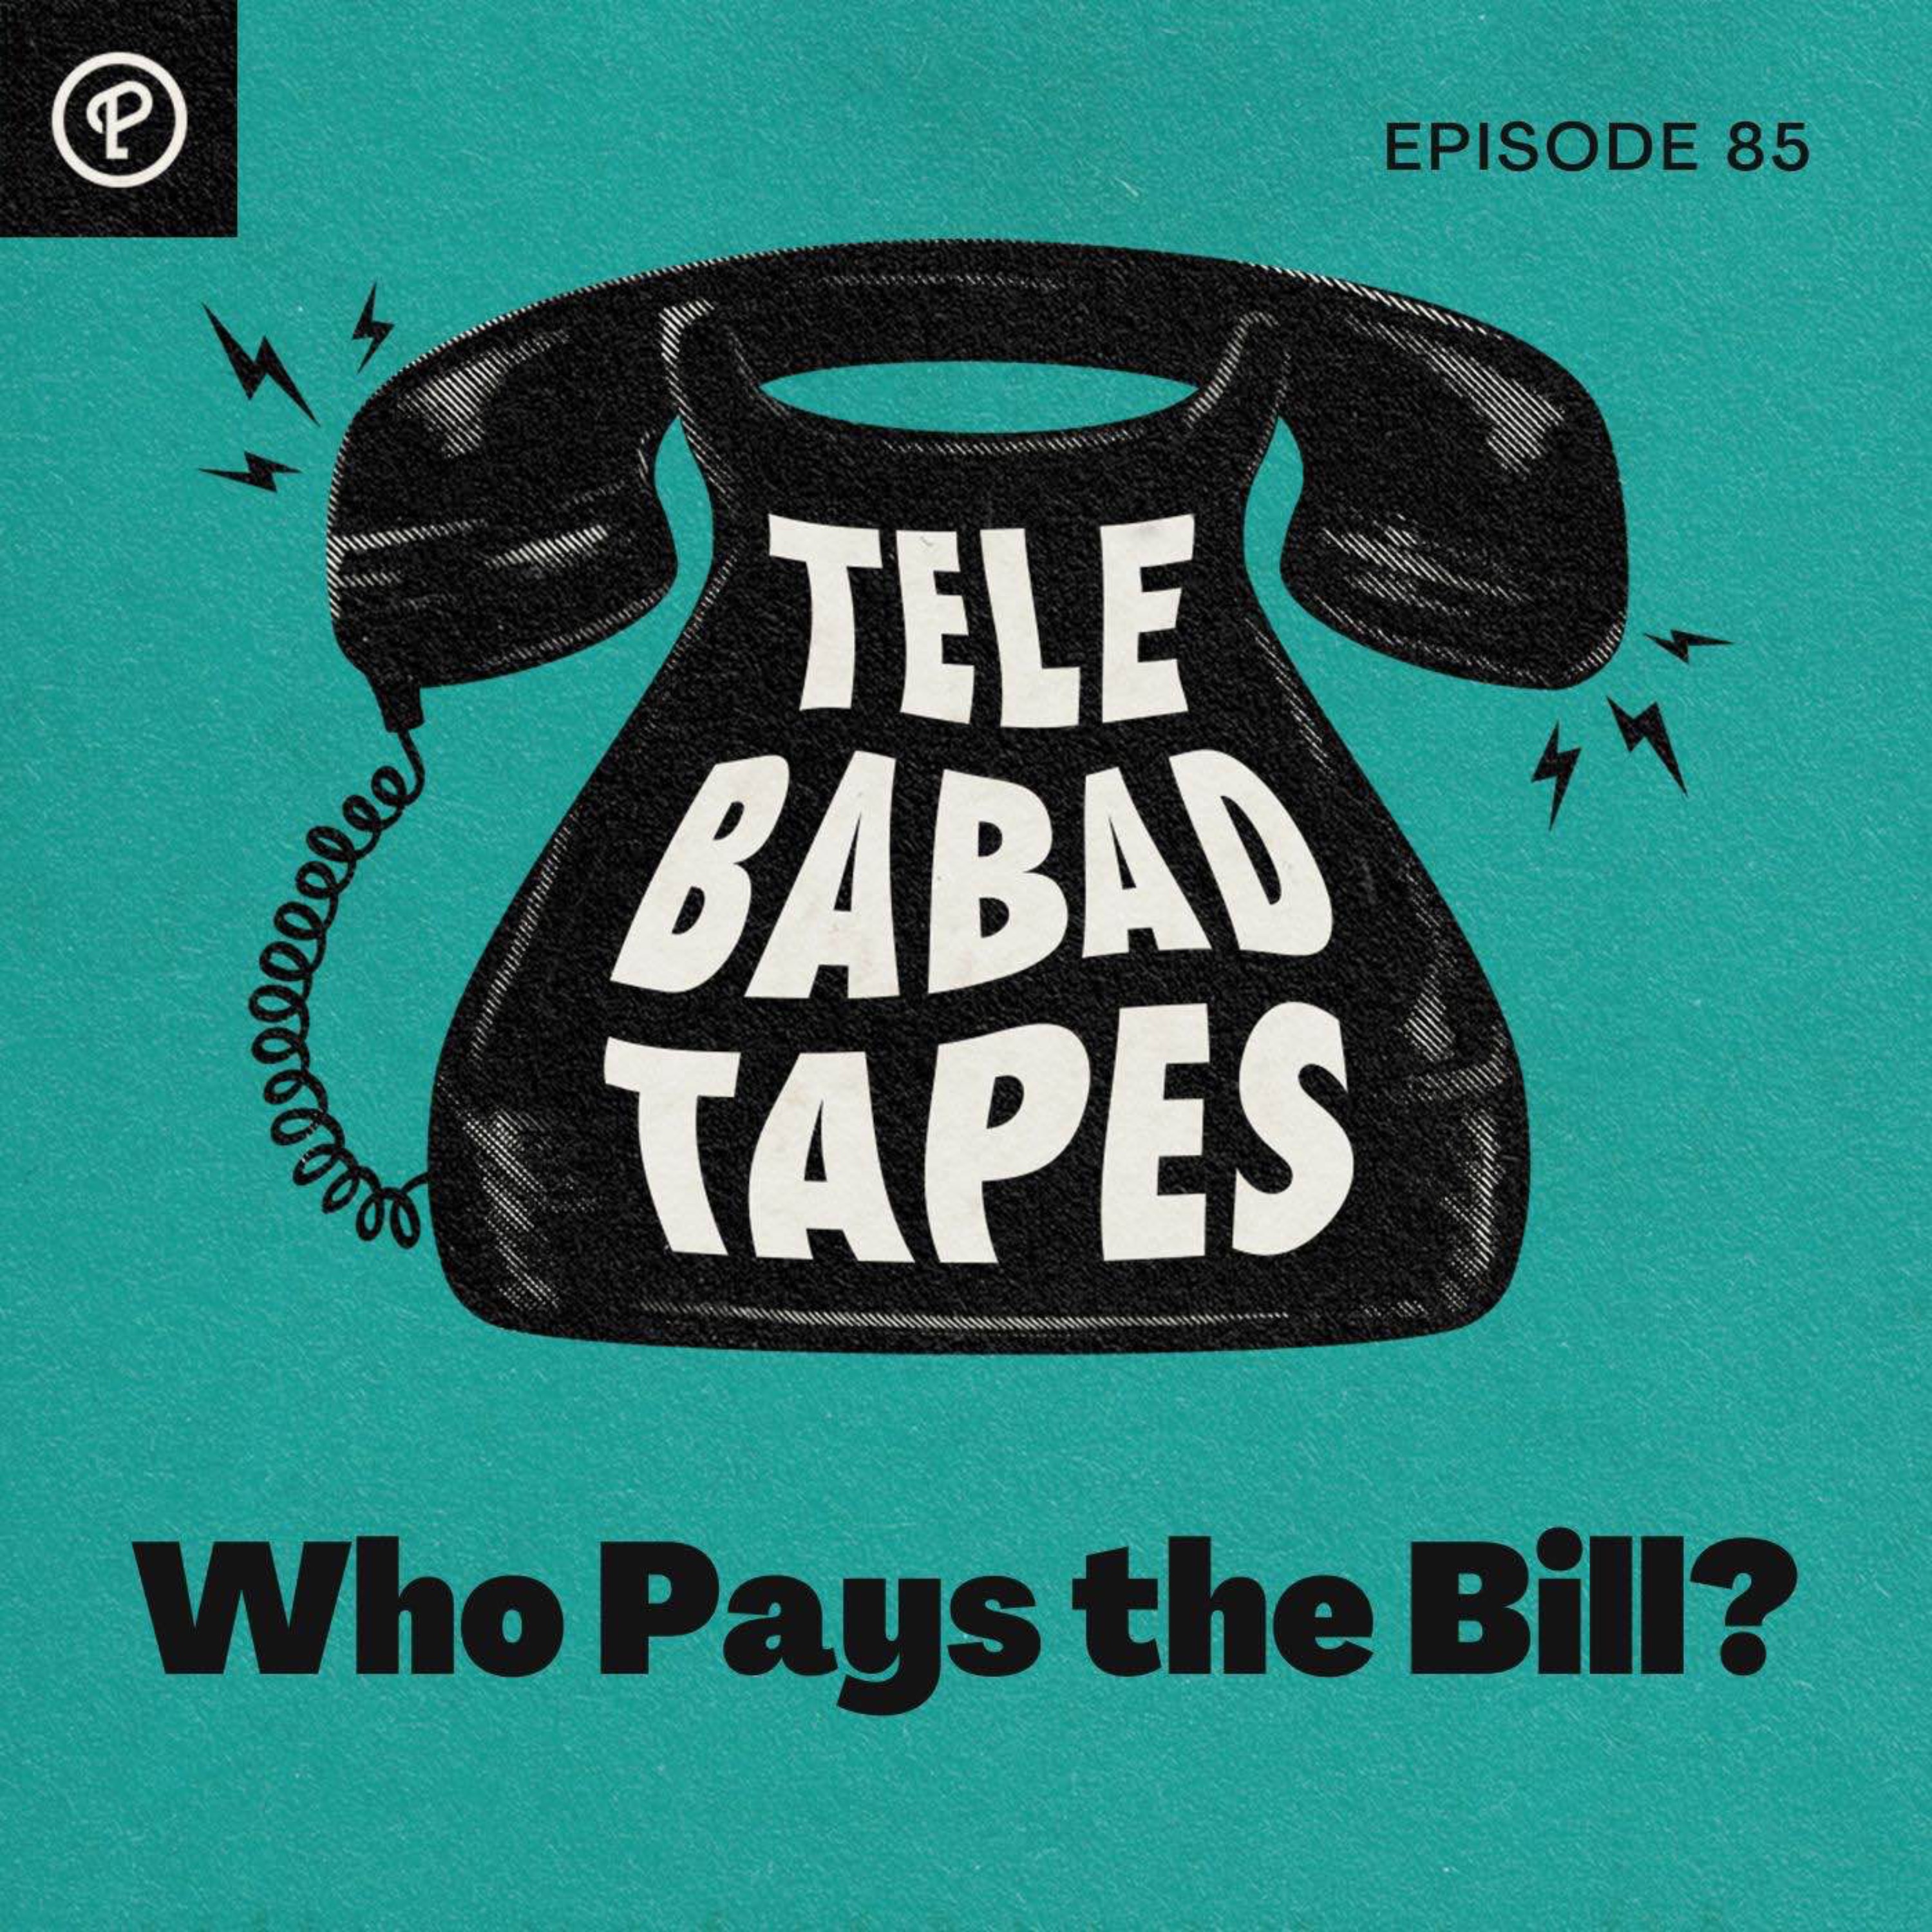 Episode 85: Who Pays the Bill?